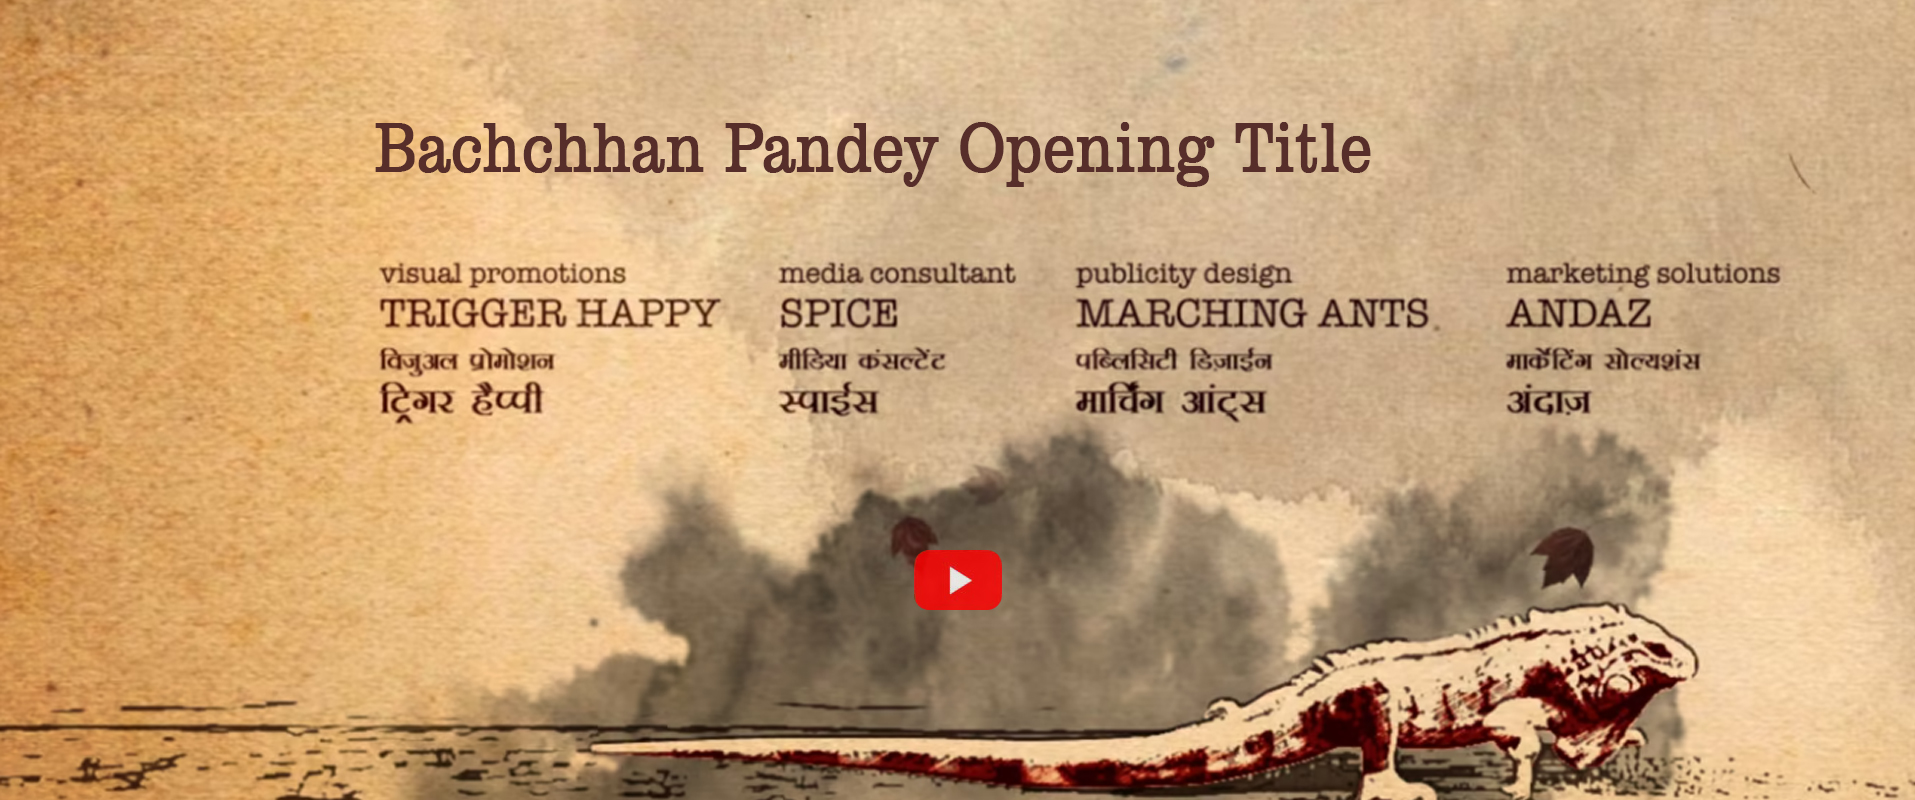 Bachchhan Pandey opening title